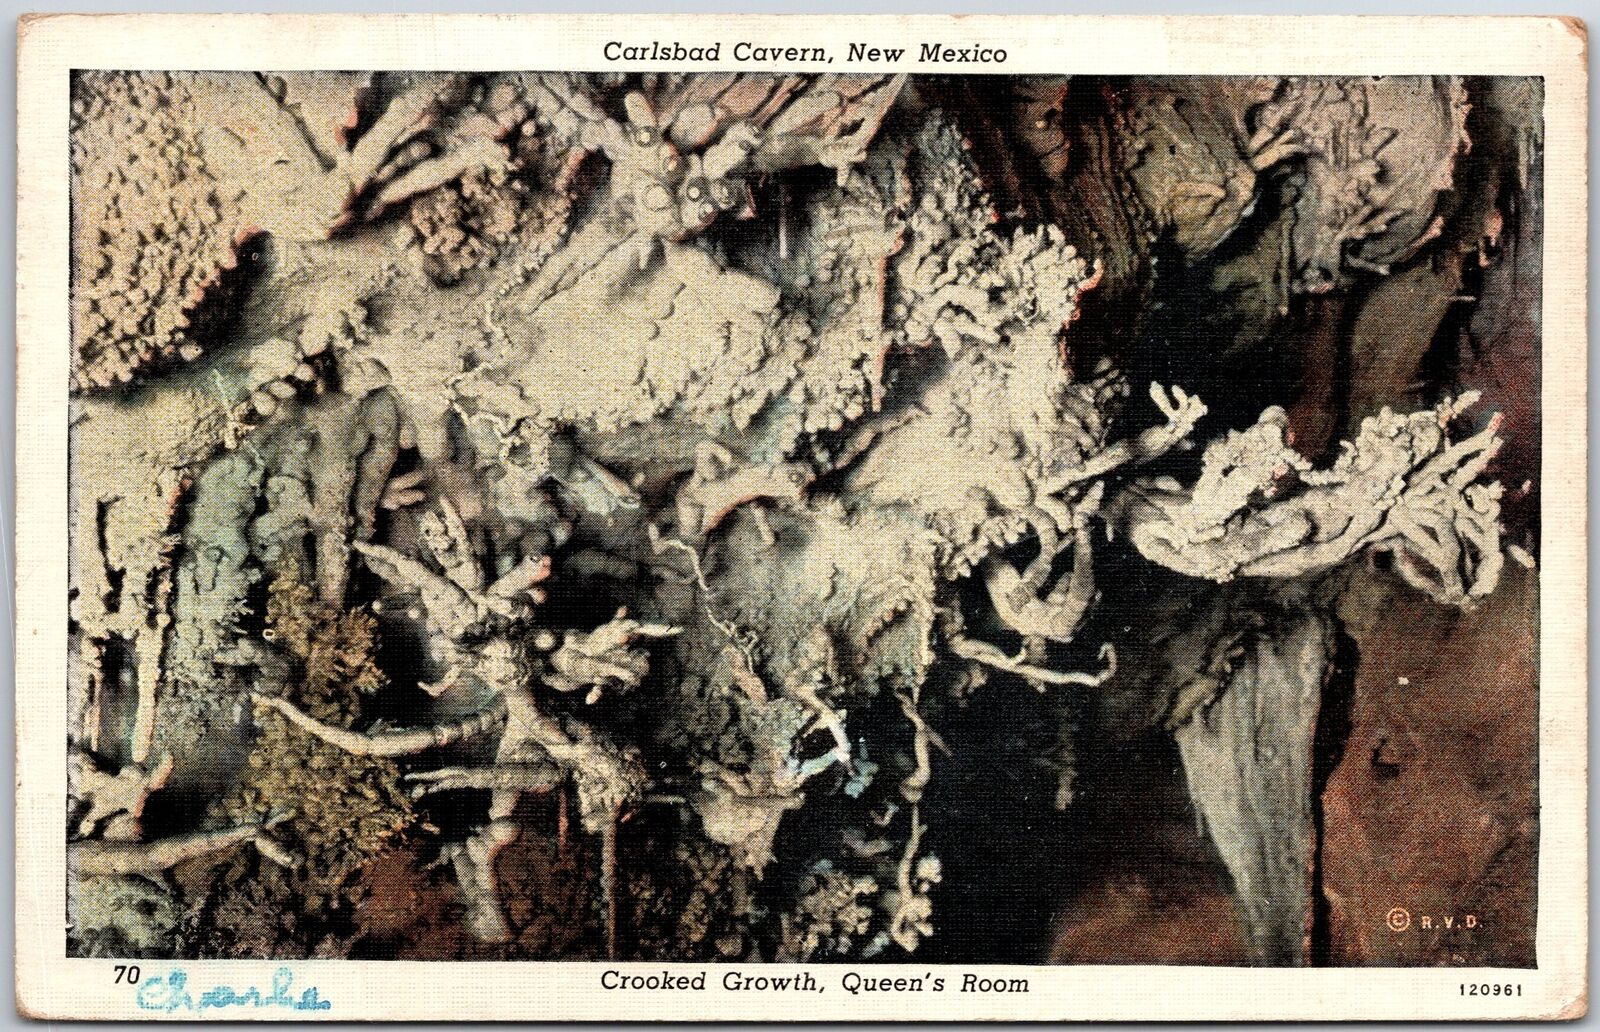 1942 Carlsbad NM- New Mexico, Crooked Growth, Queen\'s Room, Cavern, Postcard